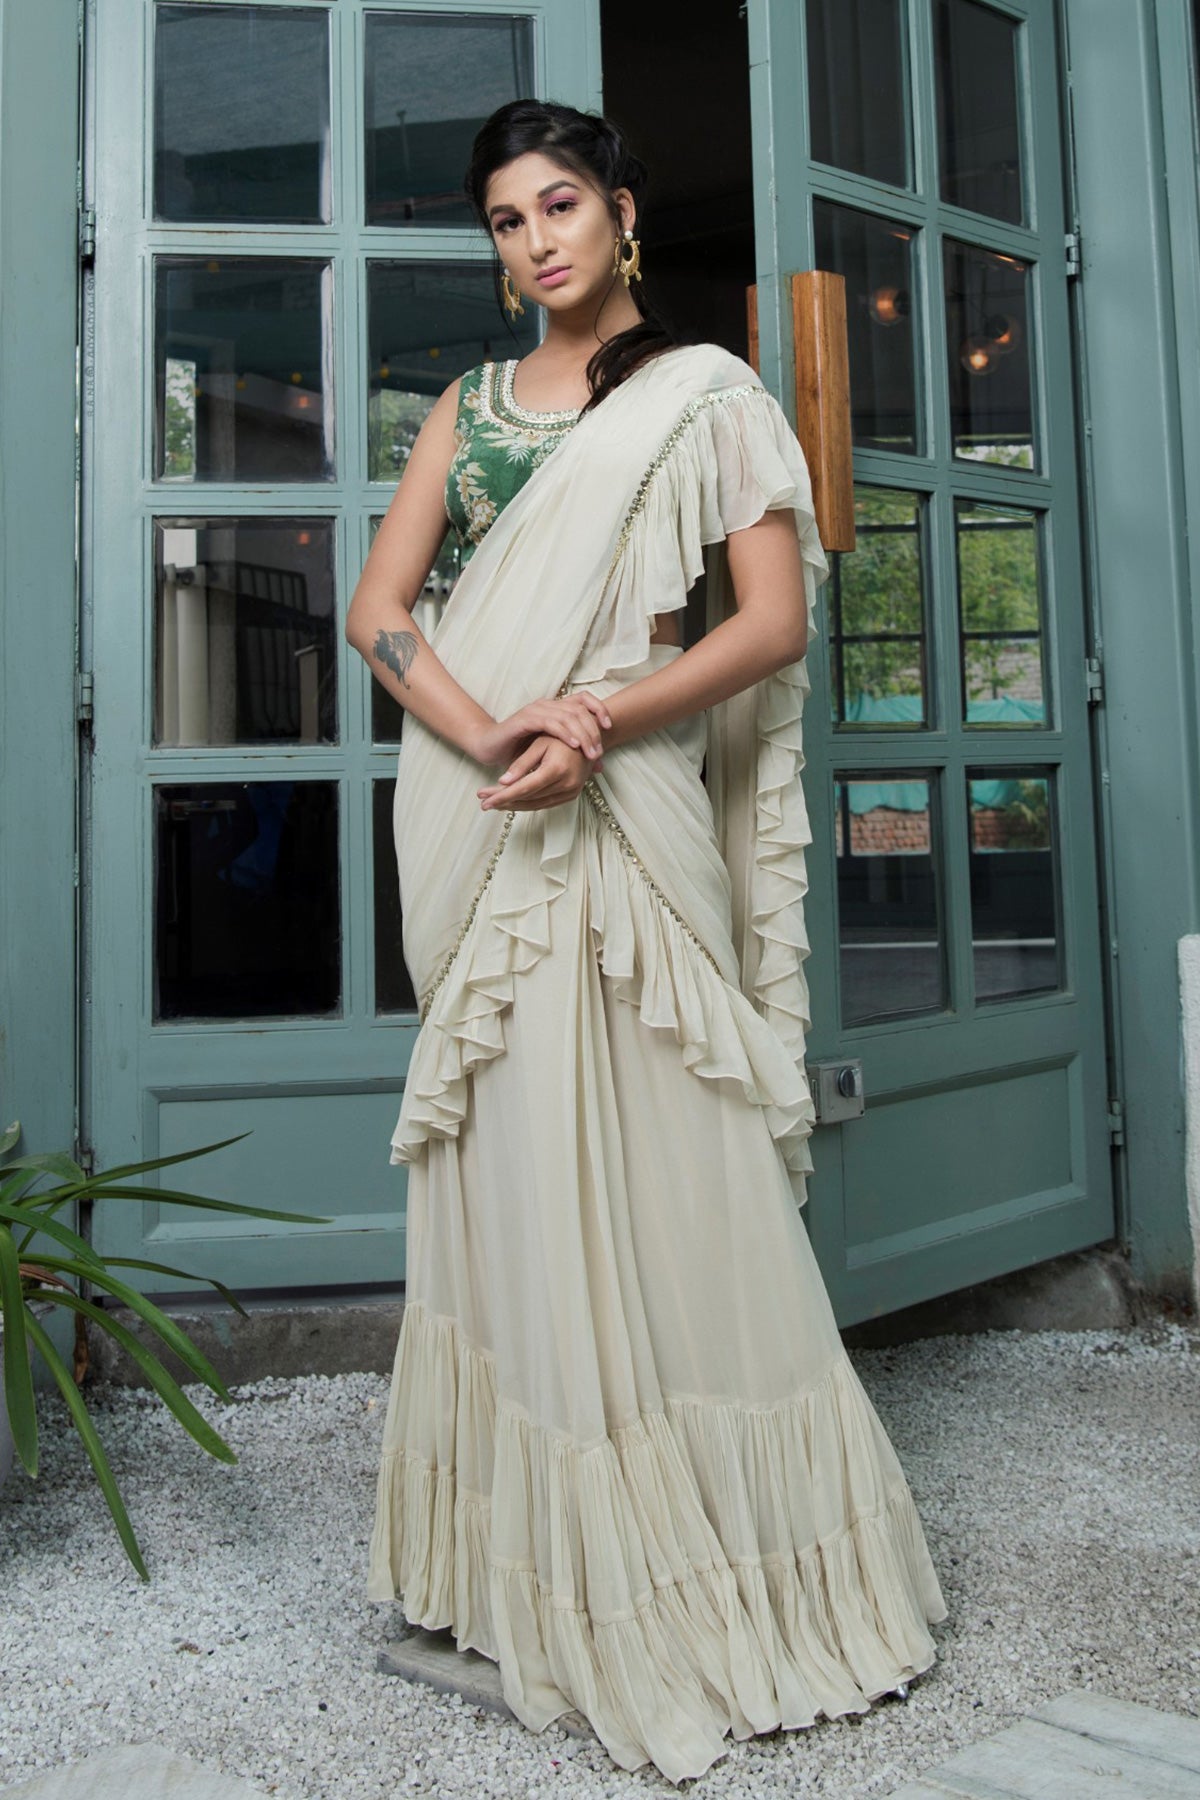 Deepika Padukone is the Definition of Resplendent in Pearl White Ruffle  Saree on Last Day of Cannes 2022